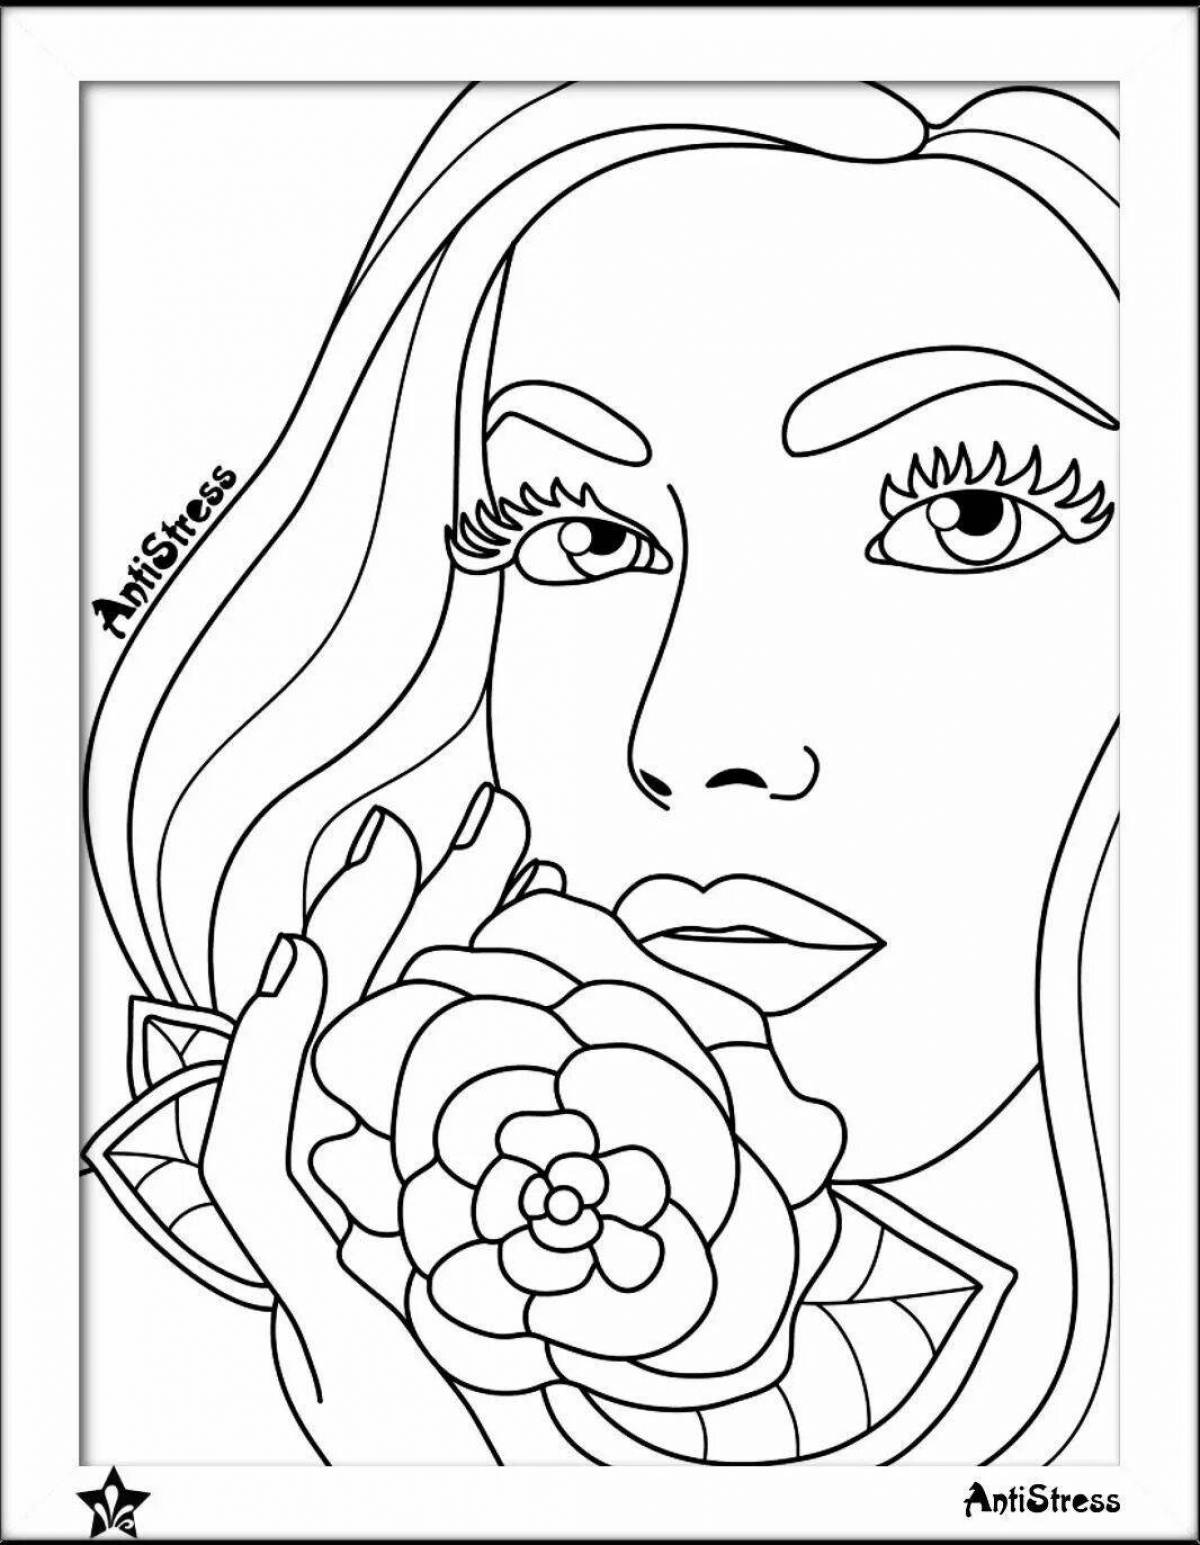 Kira's amazing coloring page